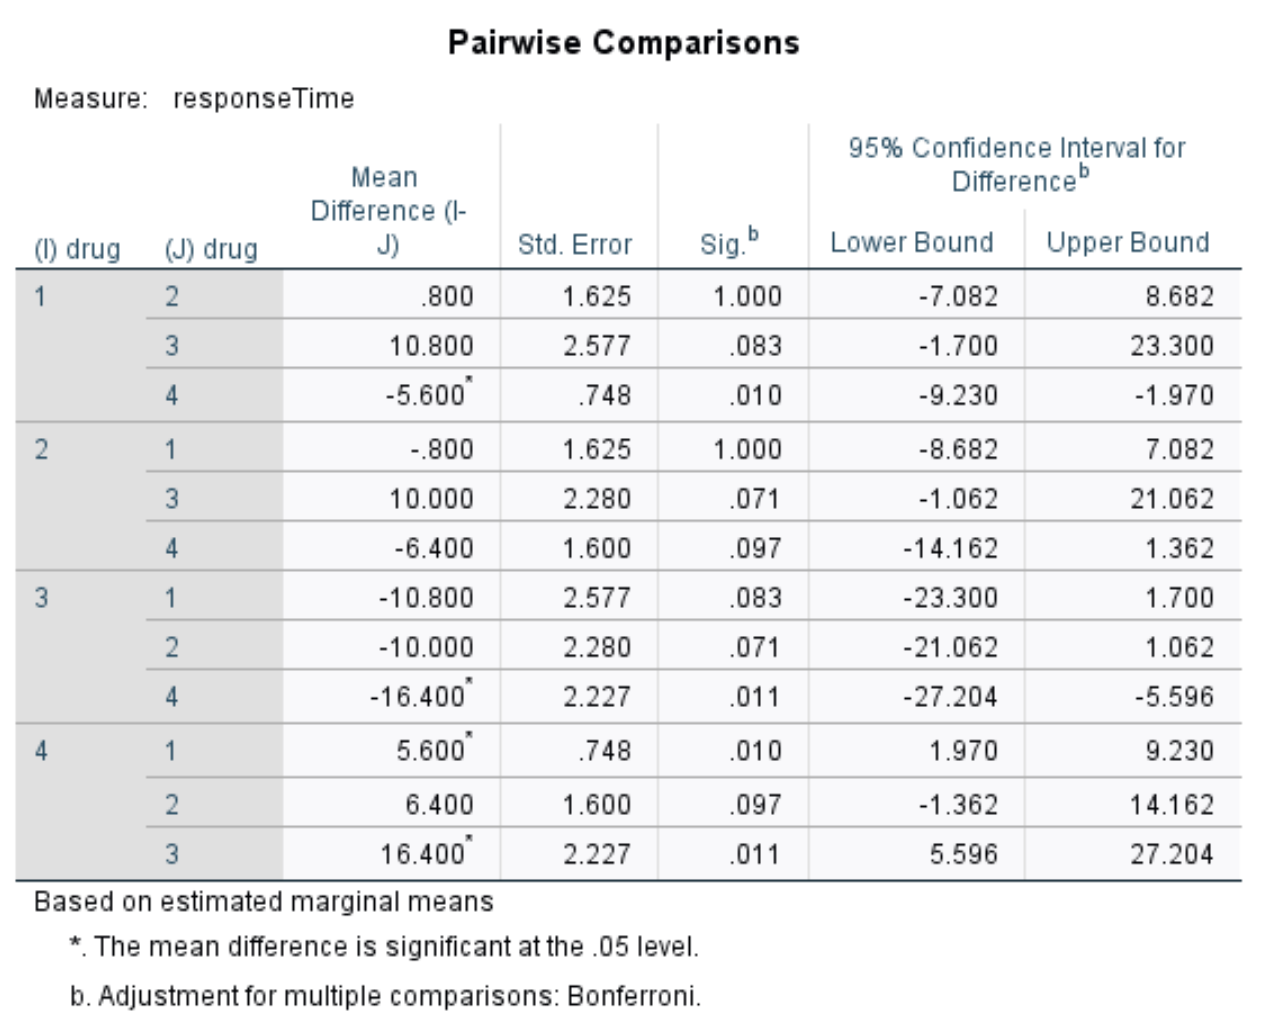 Bonferonni pairwise comparisons for ANOVA in SPSS